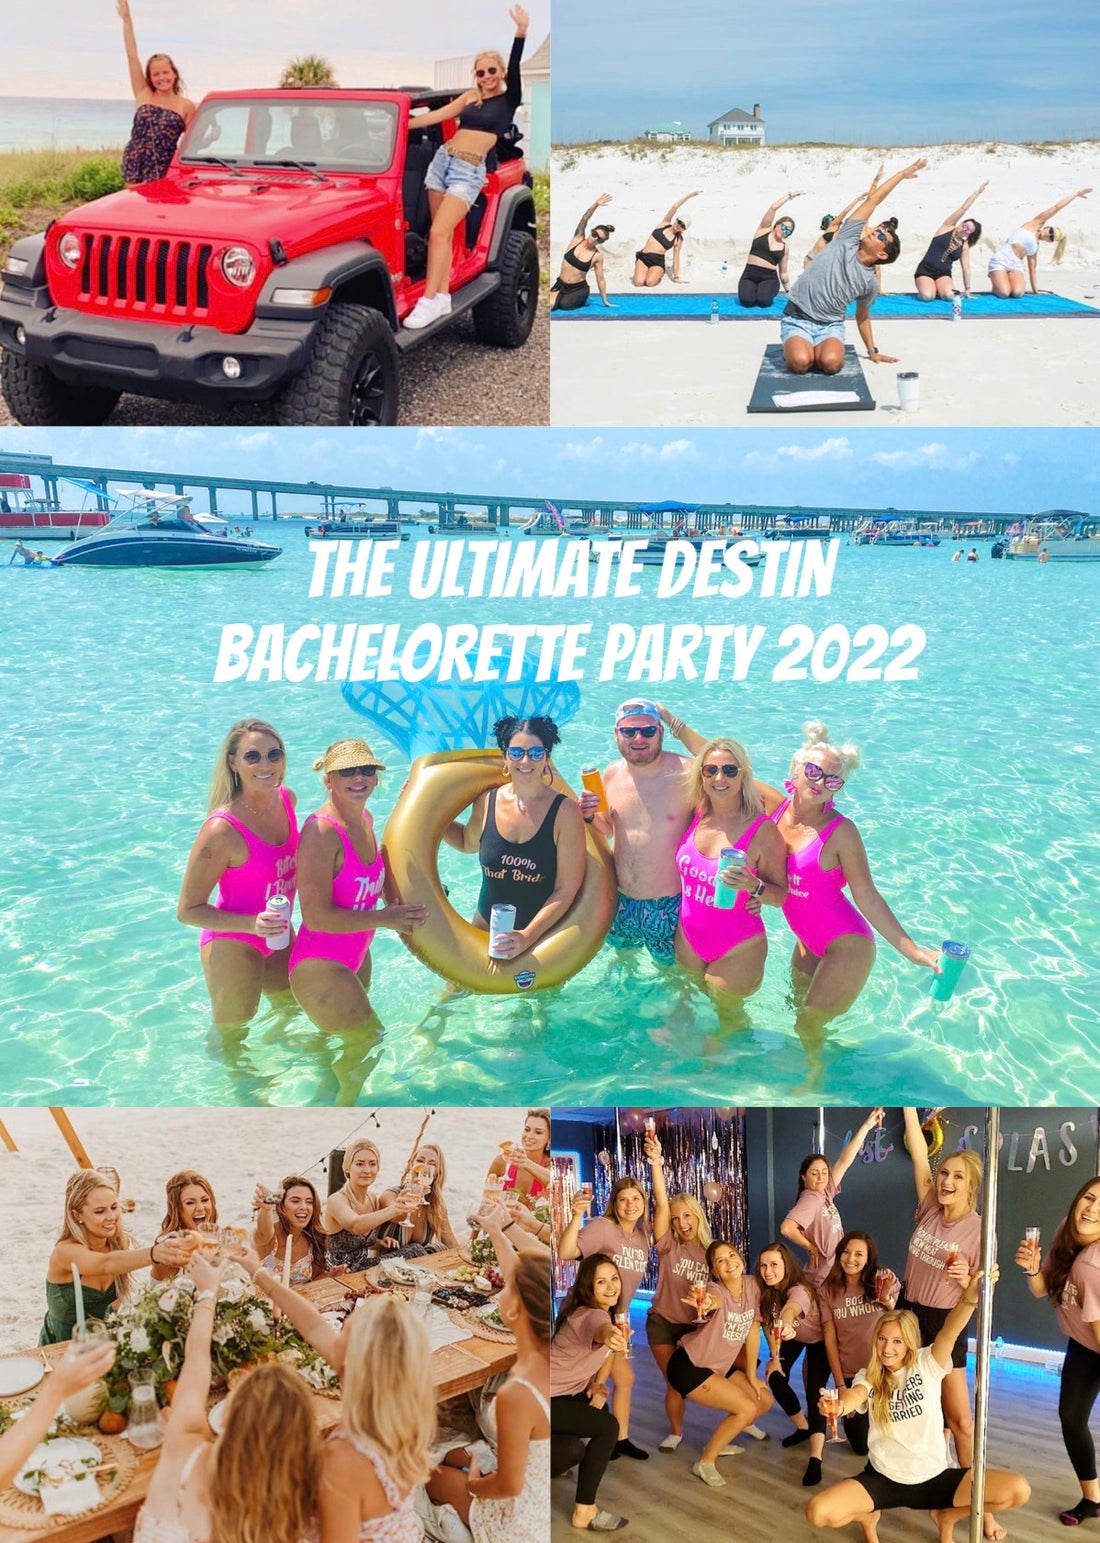 6 DESTIN BACHELORETTE ACTIVITIES YOU WON'T WANT TO MISS IN 2022!